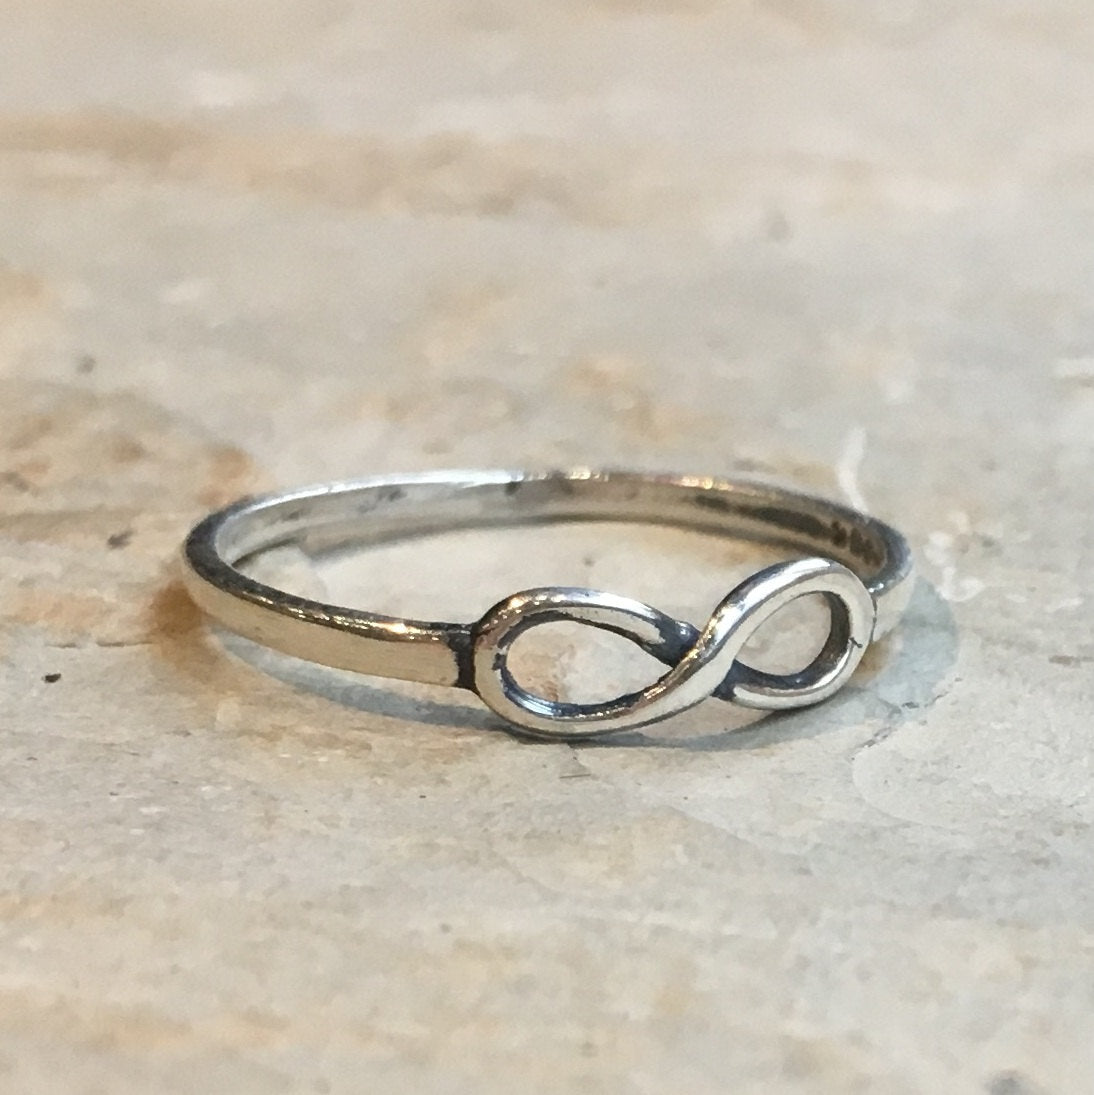 Infinity ring, Silver Infinity Ring, Sterling silver ring, Friendship ring, Eternity ring, Thin stacking ring, bff Gift - Infinite R2469S